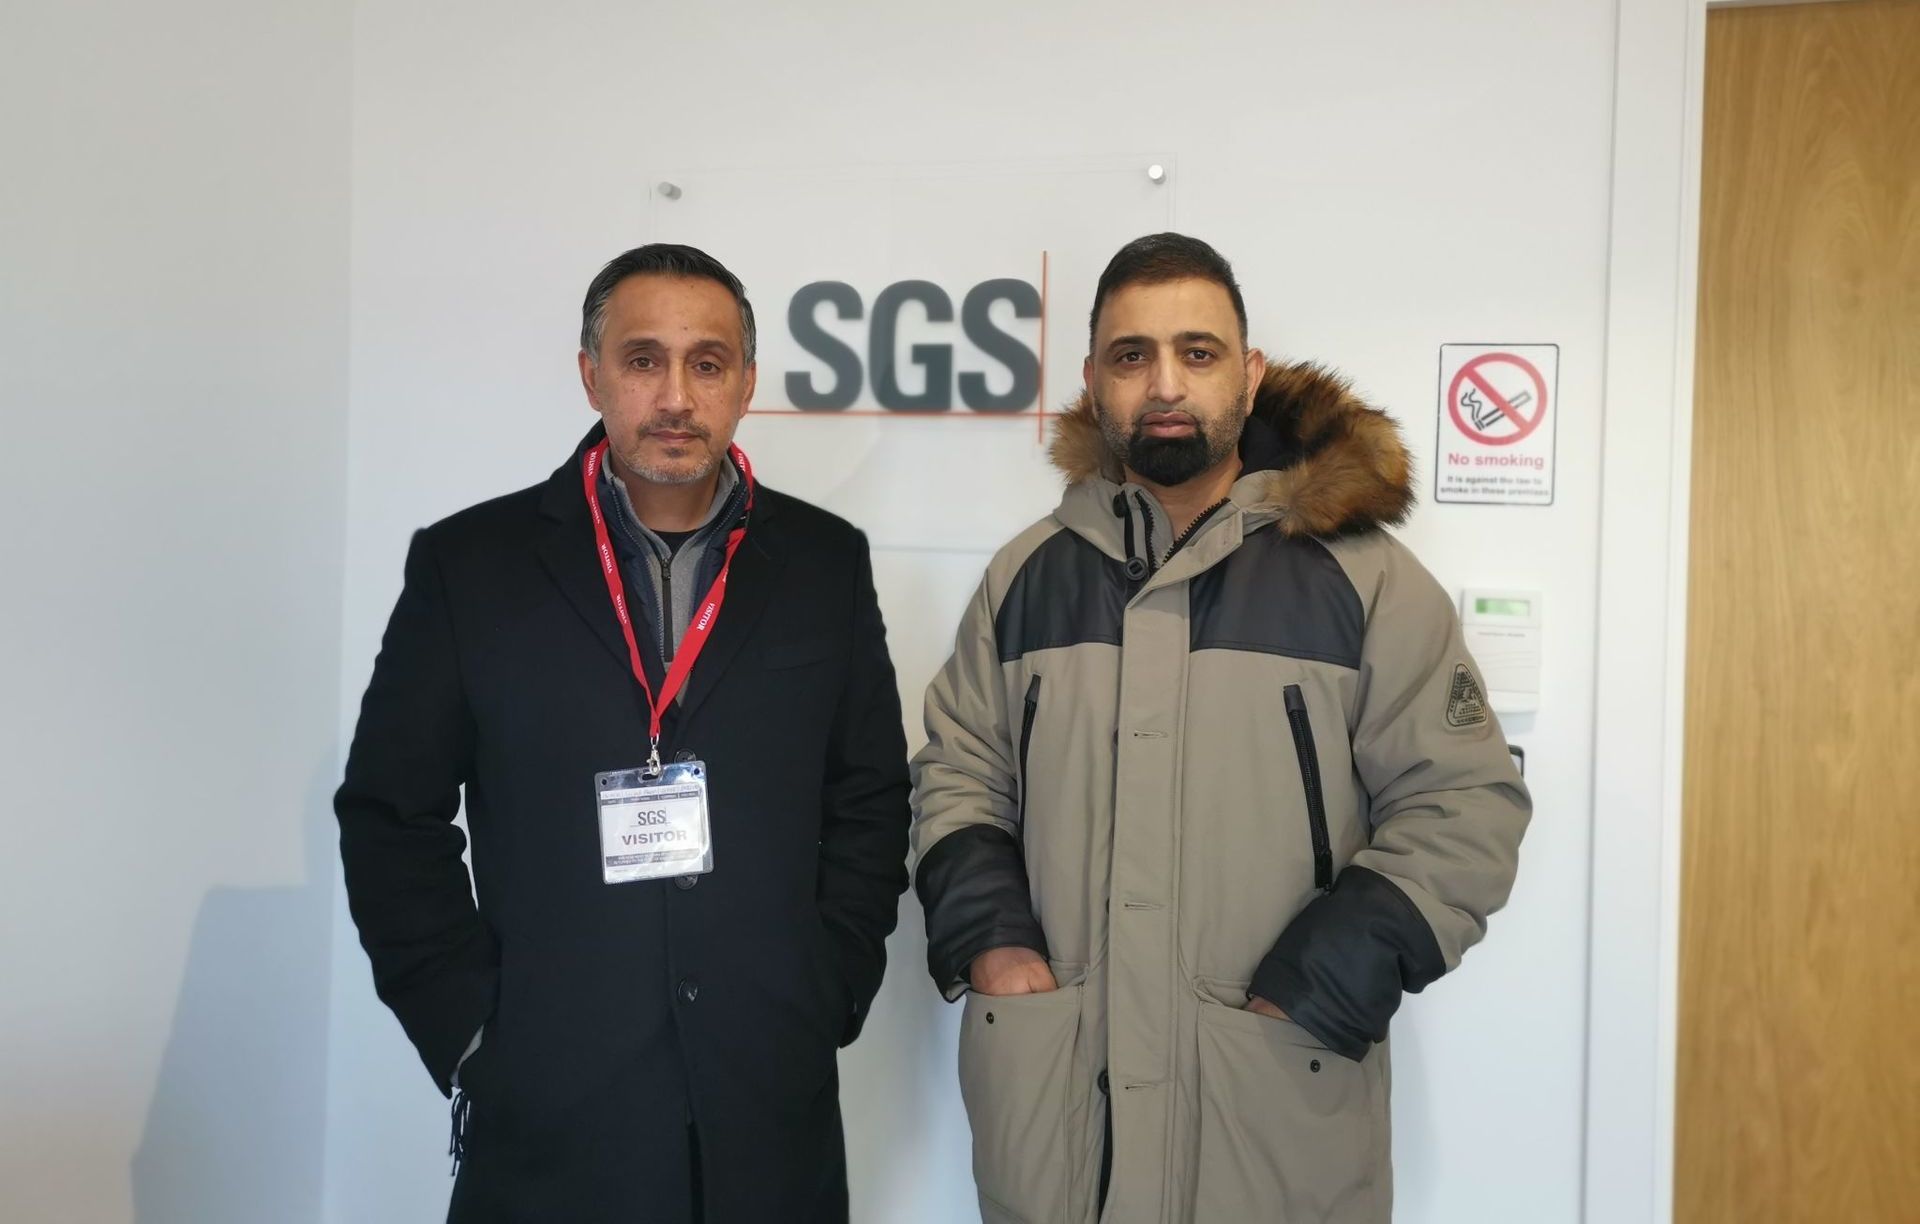 ATMF visiting SGS - the world's leading testing, inspection and certification company in January 2023.